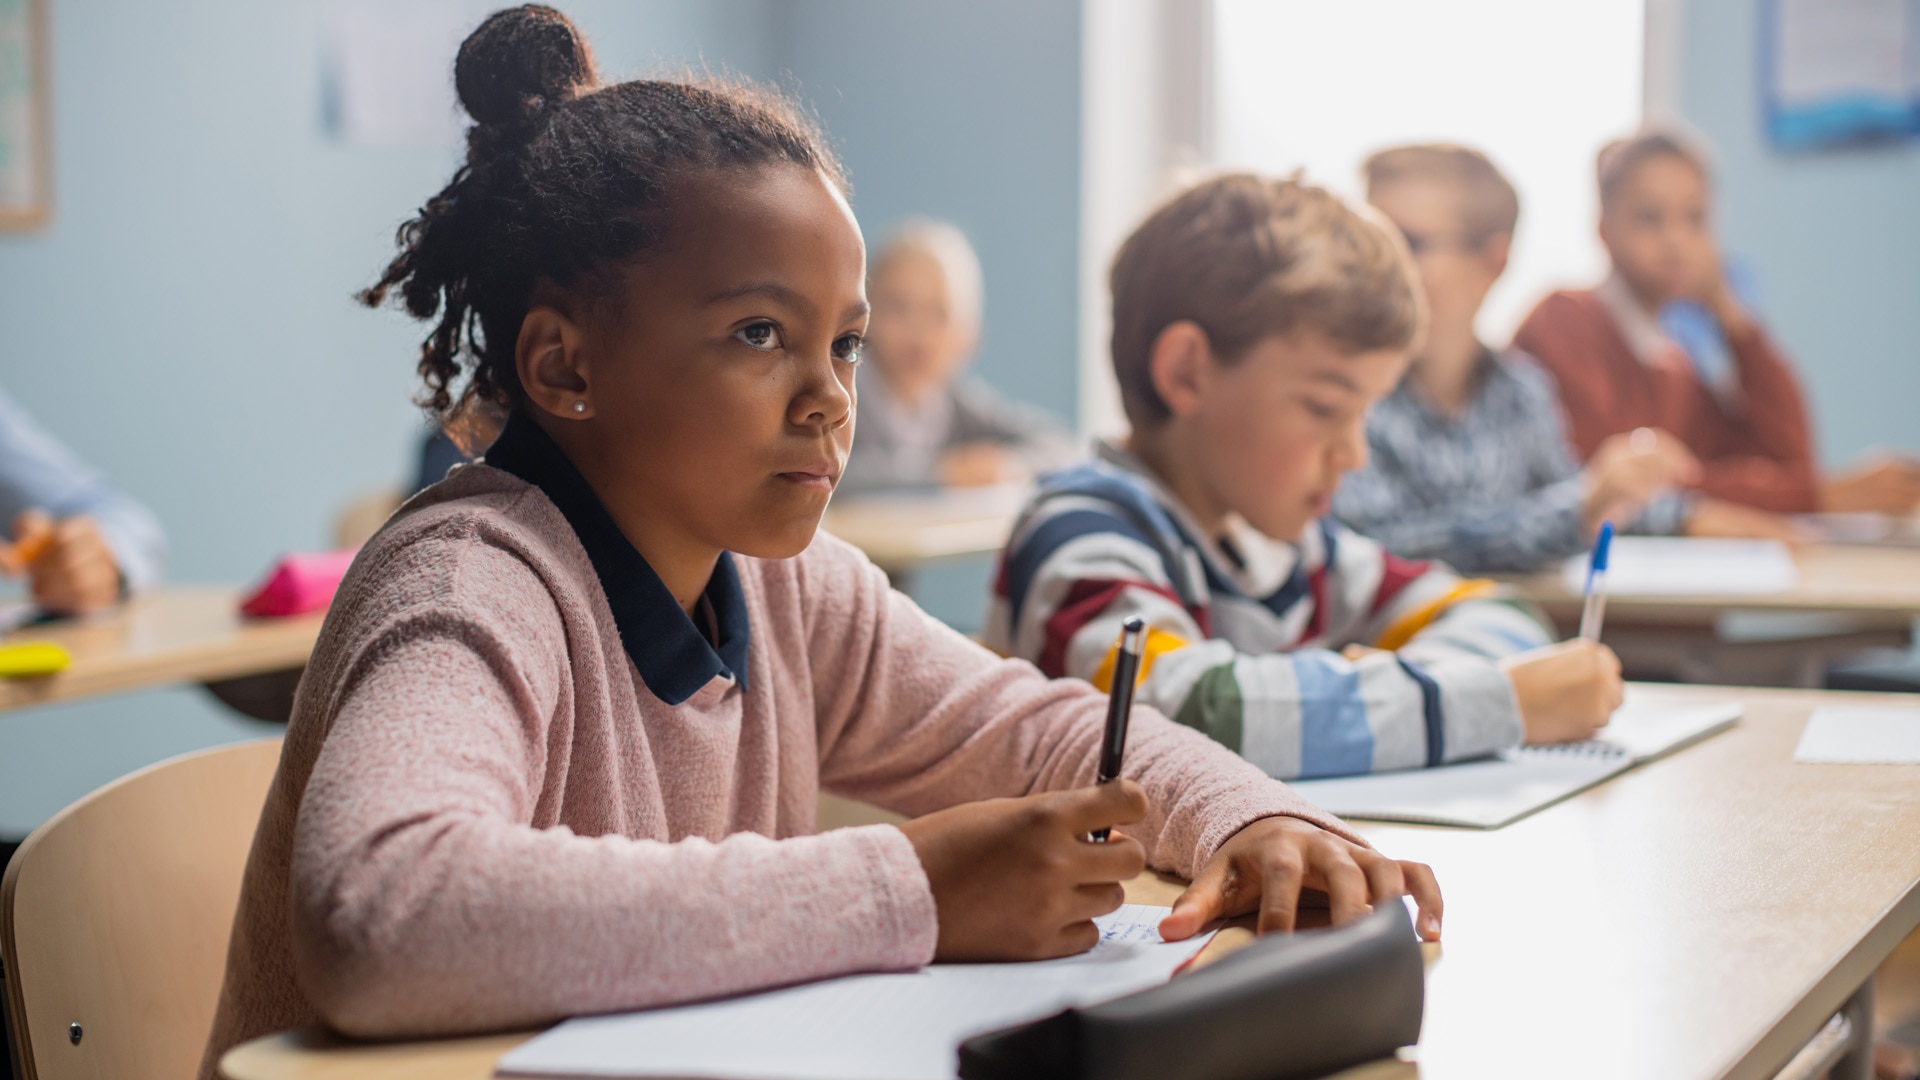 In Elementary School Classroom Brilliant Black Girl Writes in Exercise Notebook, Taking Test and Writing Exam. Junior Classroom with Diverse Group of Children Working Diligently and Learning New Stuff; Shutterstock ID 1767333926; purchase_order: -; job: -; client: -; other: -